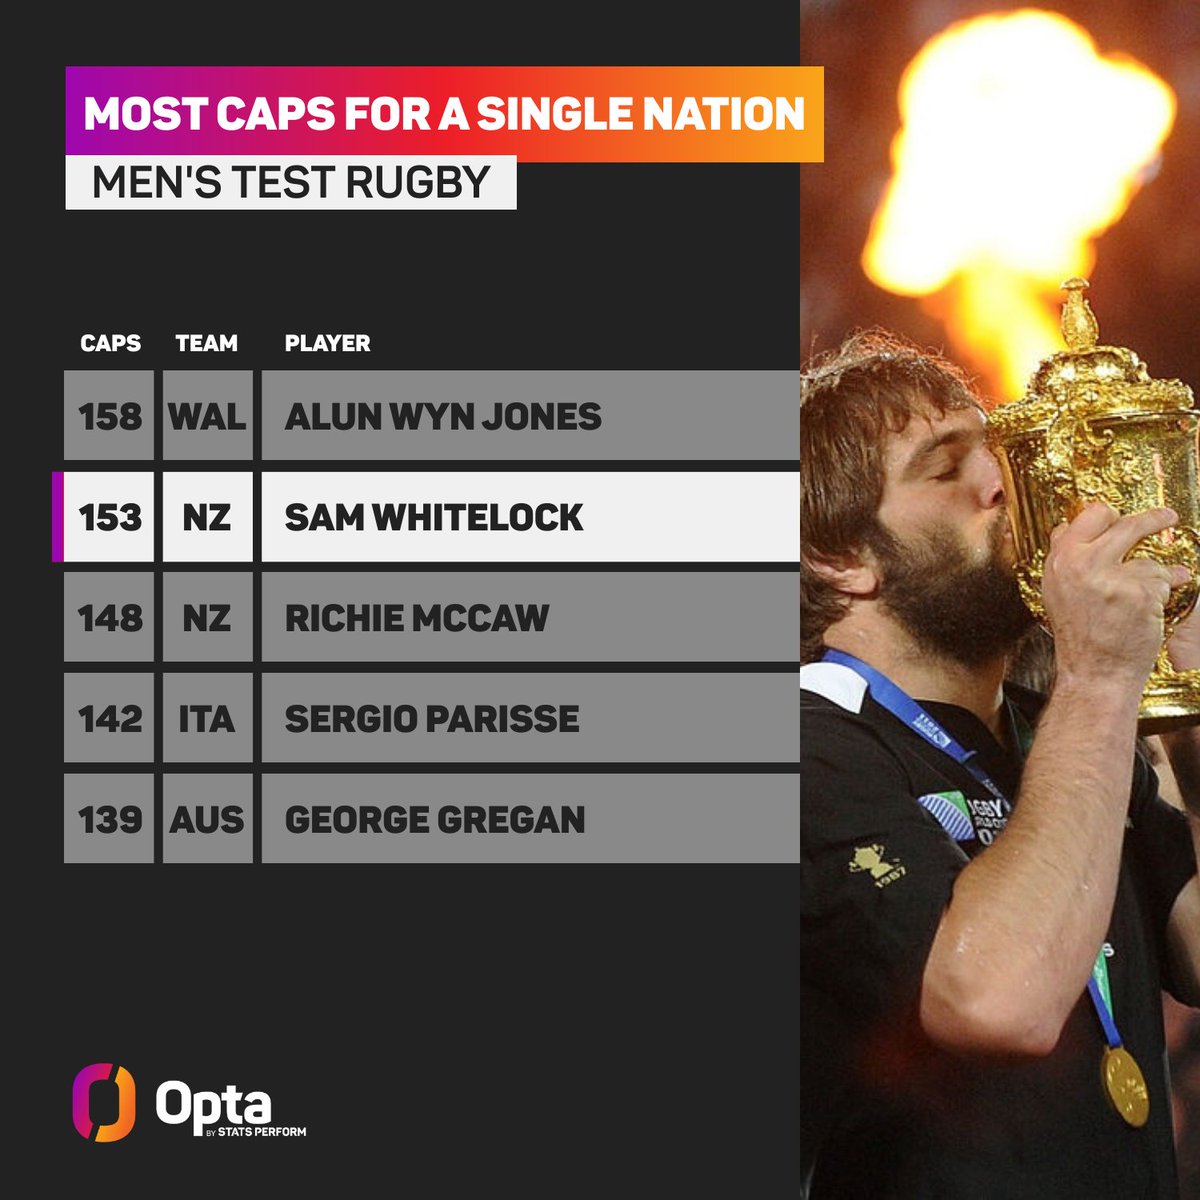 26 – Sam Whitelock has played in 26 men's @rugbyworldcup matches, at least four more than any other player, and is also the only player to have appeared in three men’s finals – Whitelock retires as the @AllBlacks’ all-time record appearance holder (153). Icon.